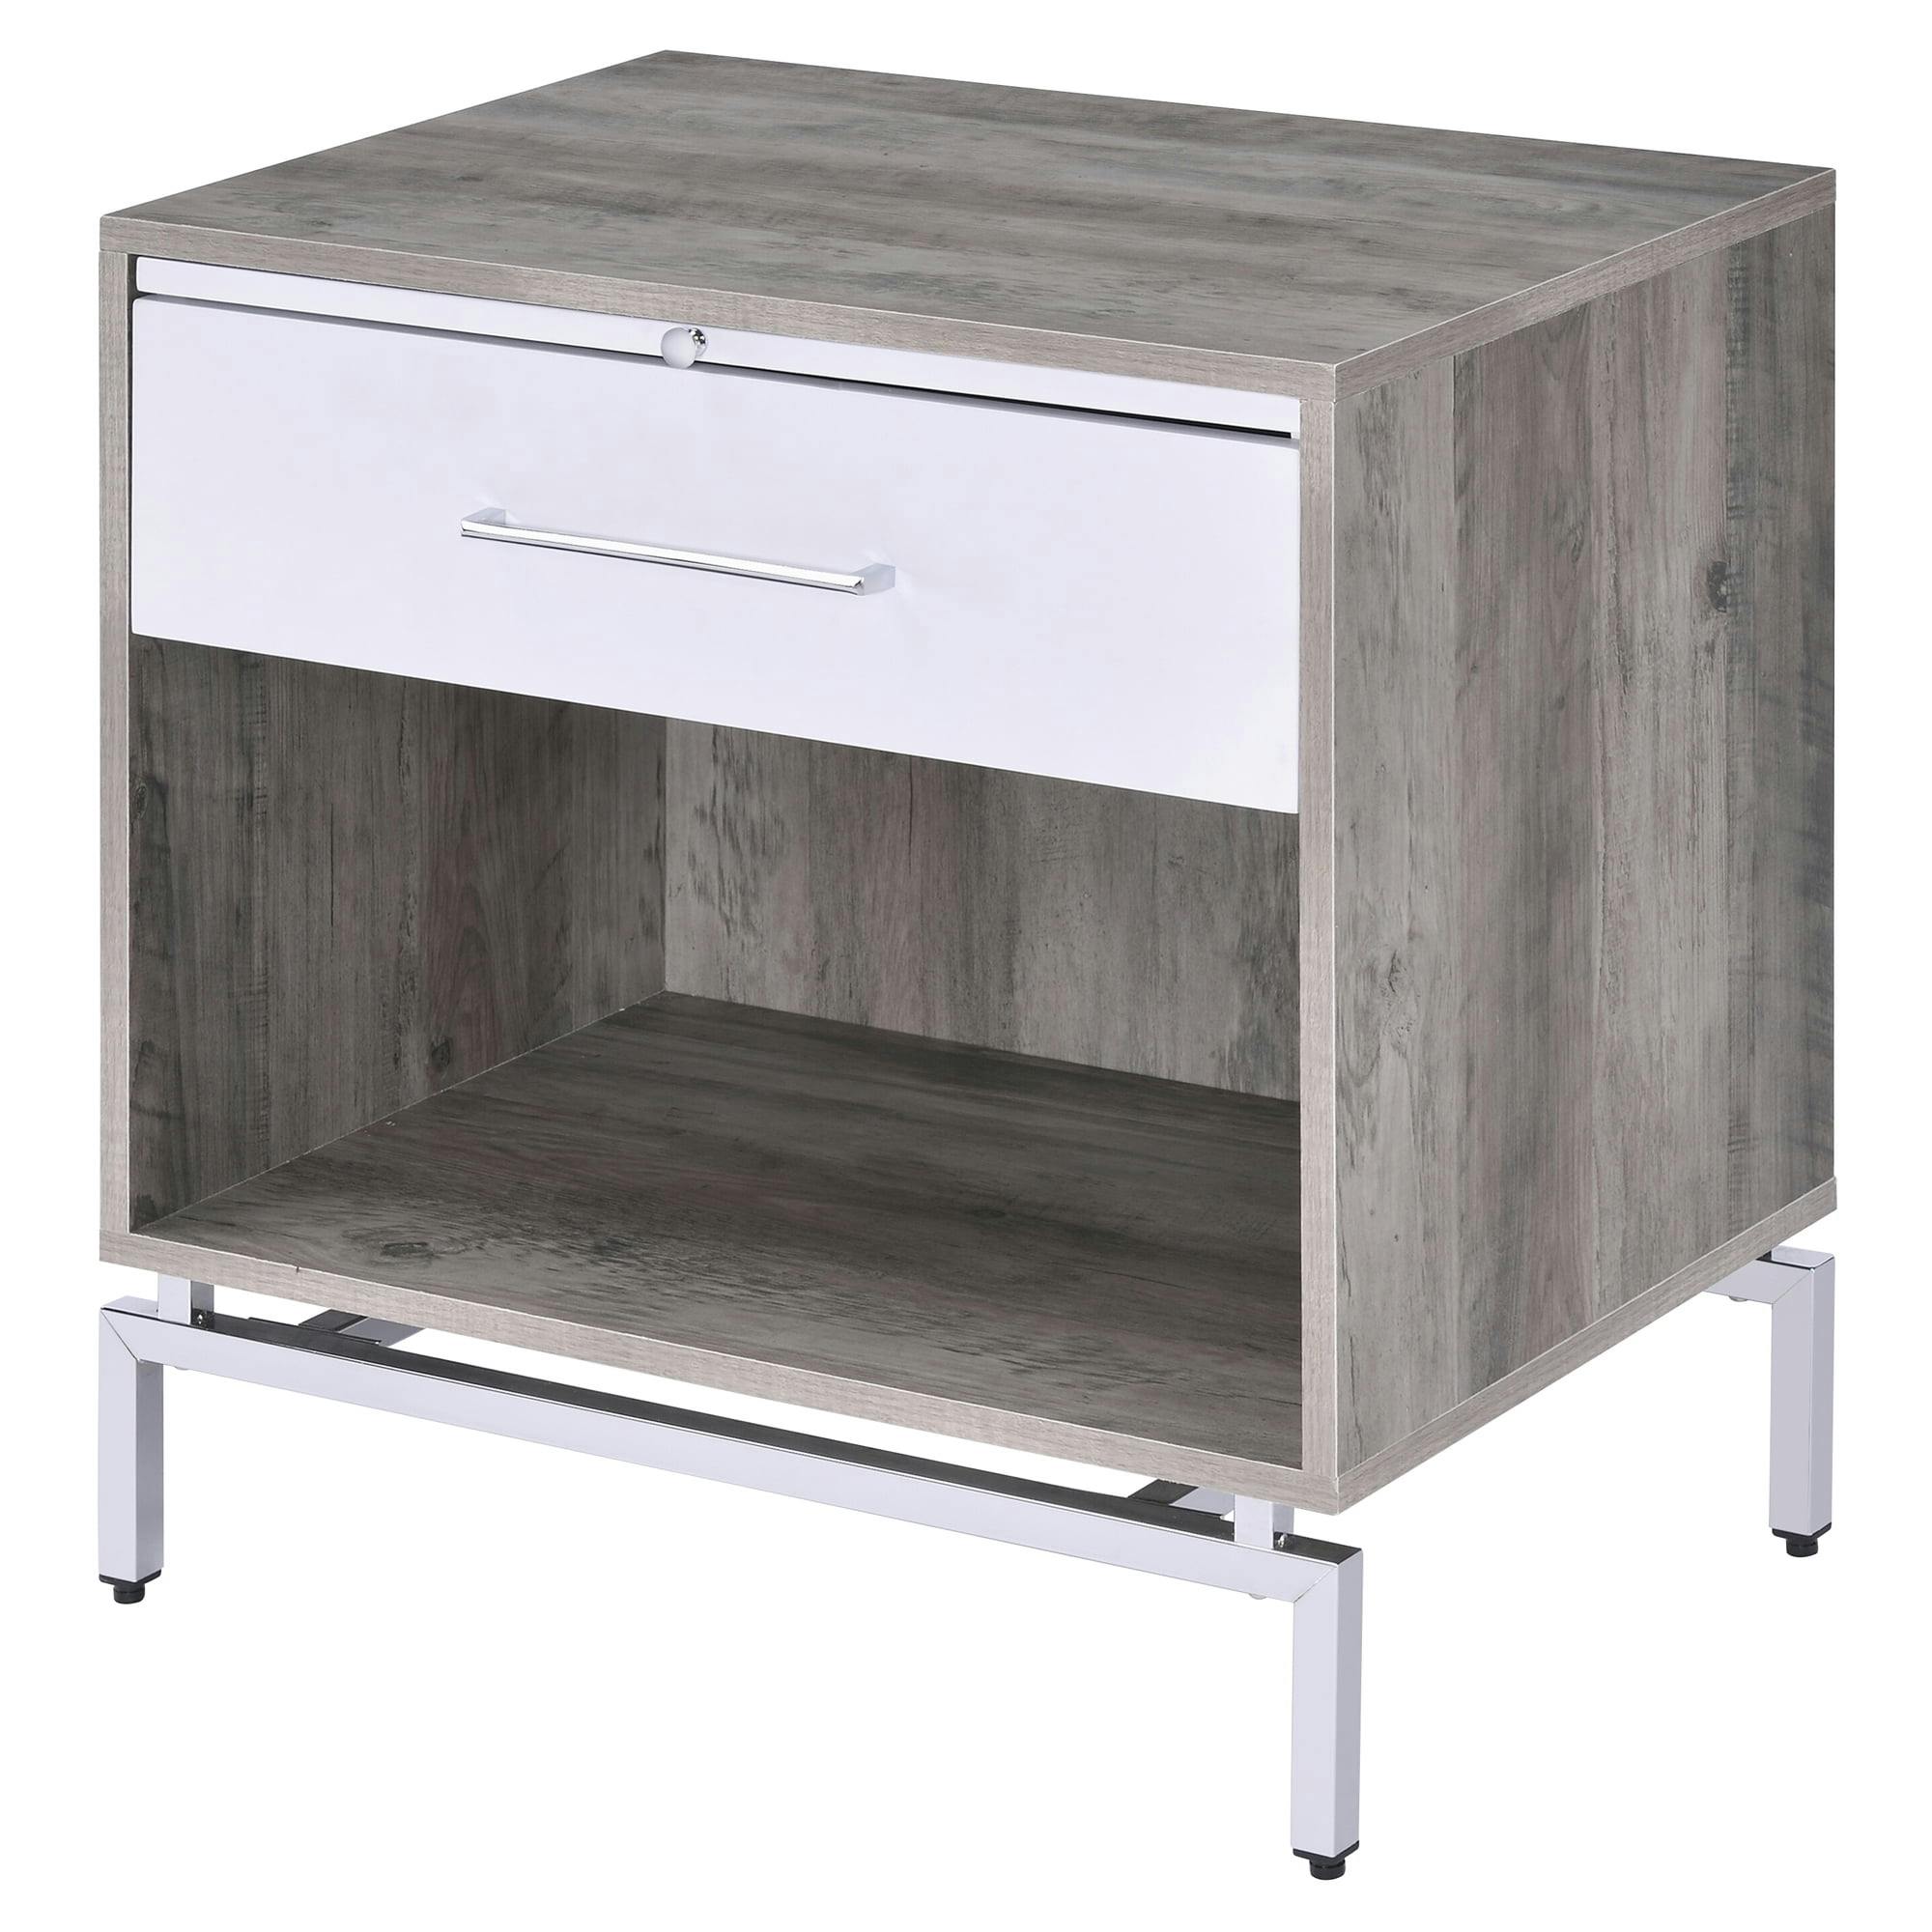 Weathered Gray Oak & White Metal Accent Table with Storage